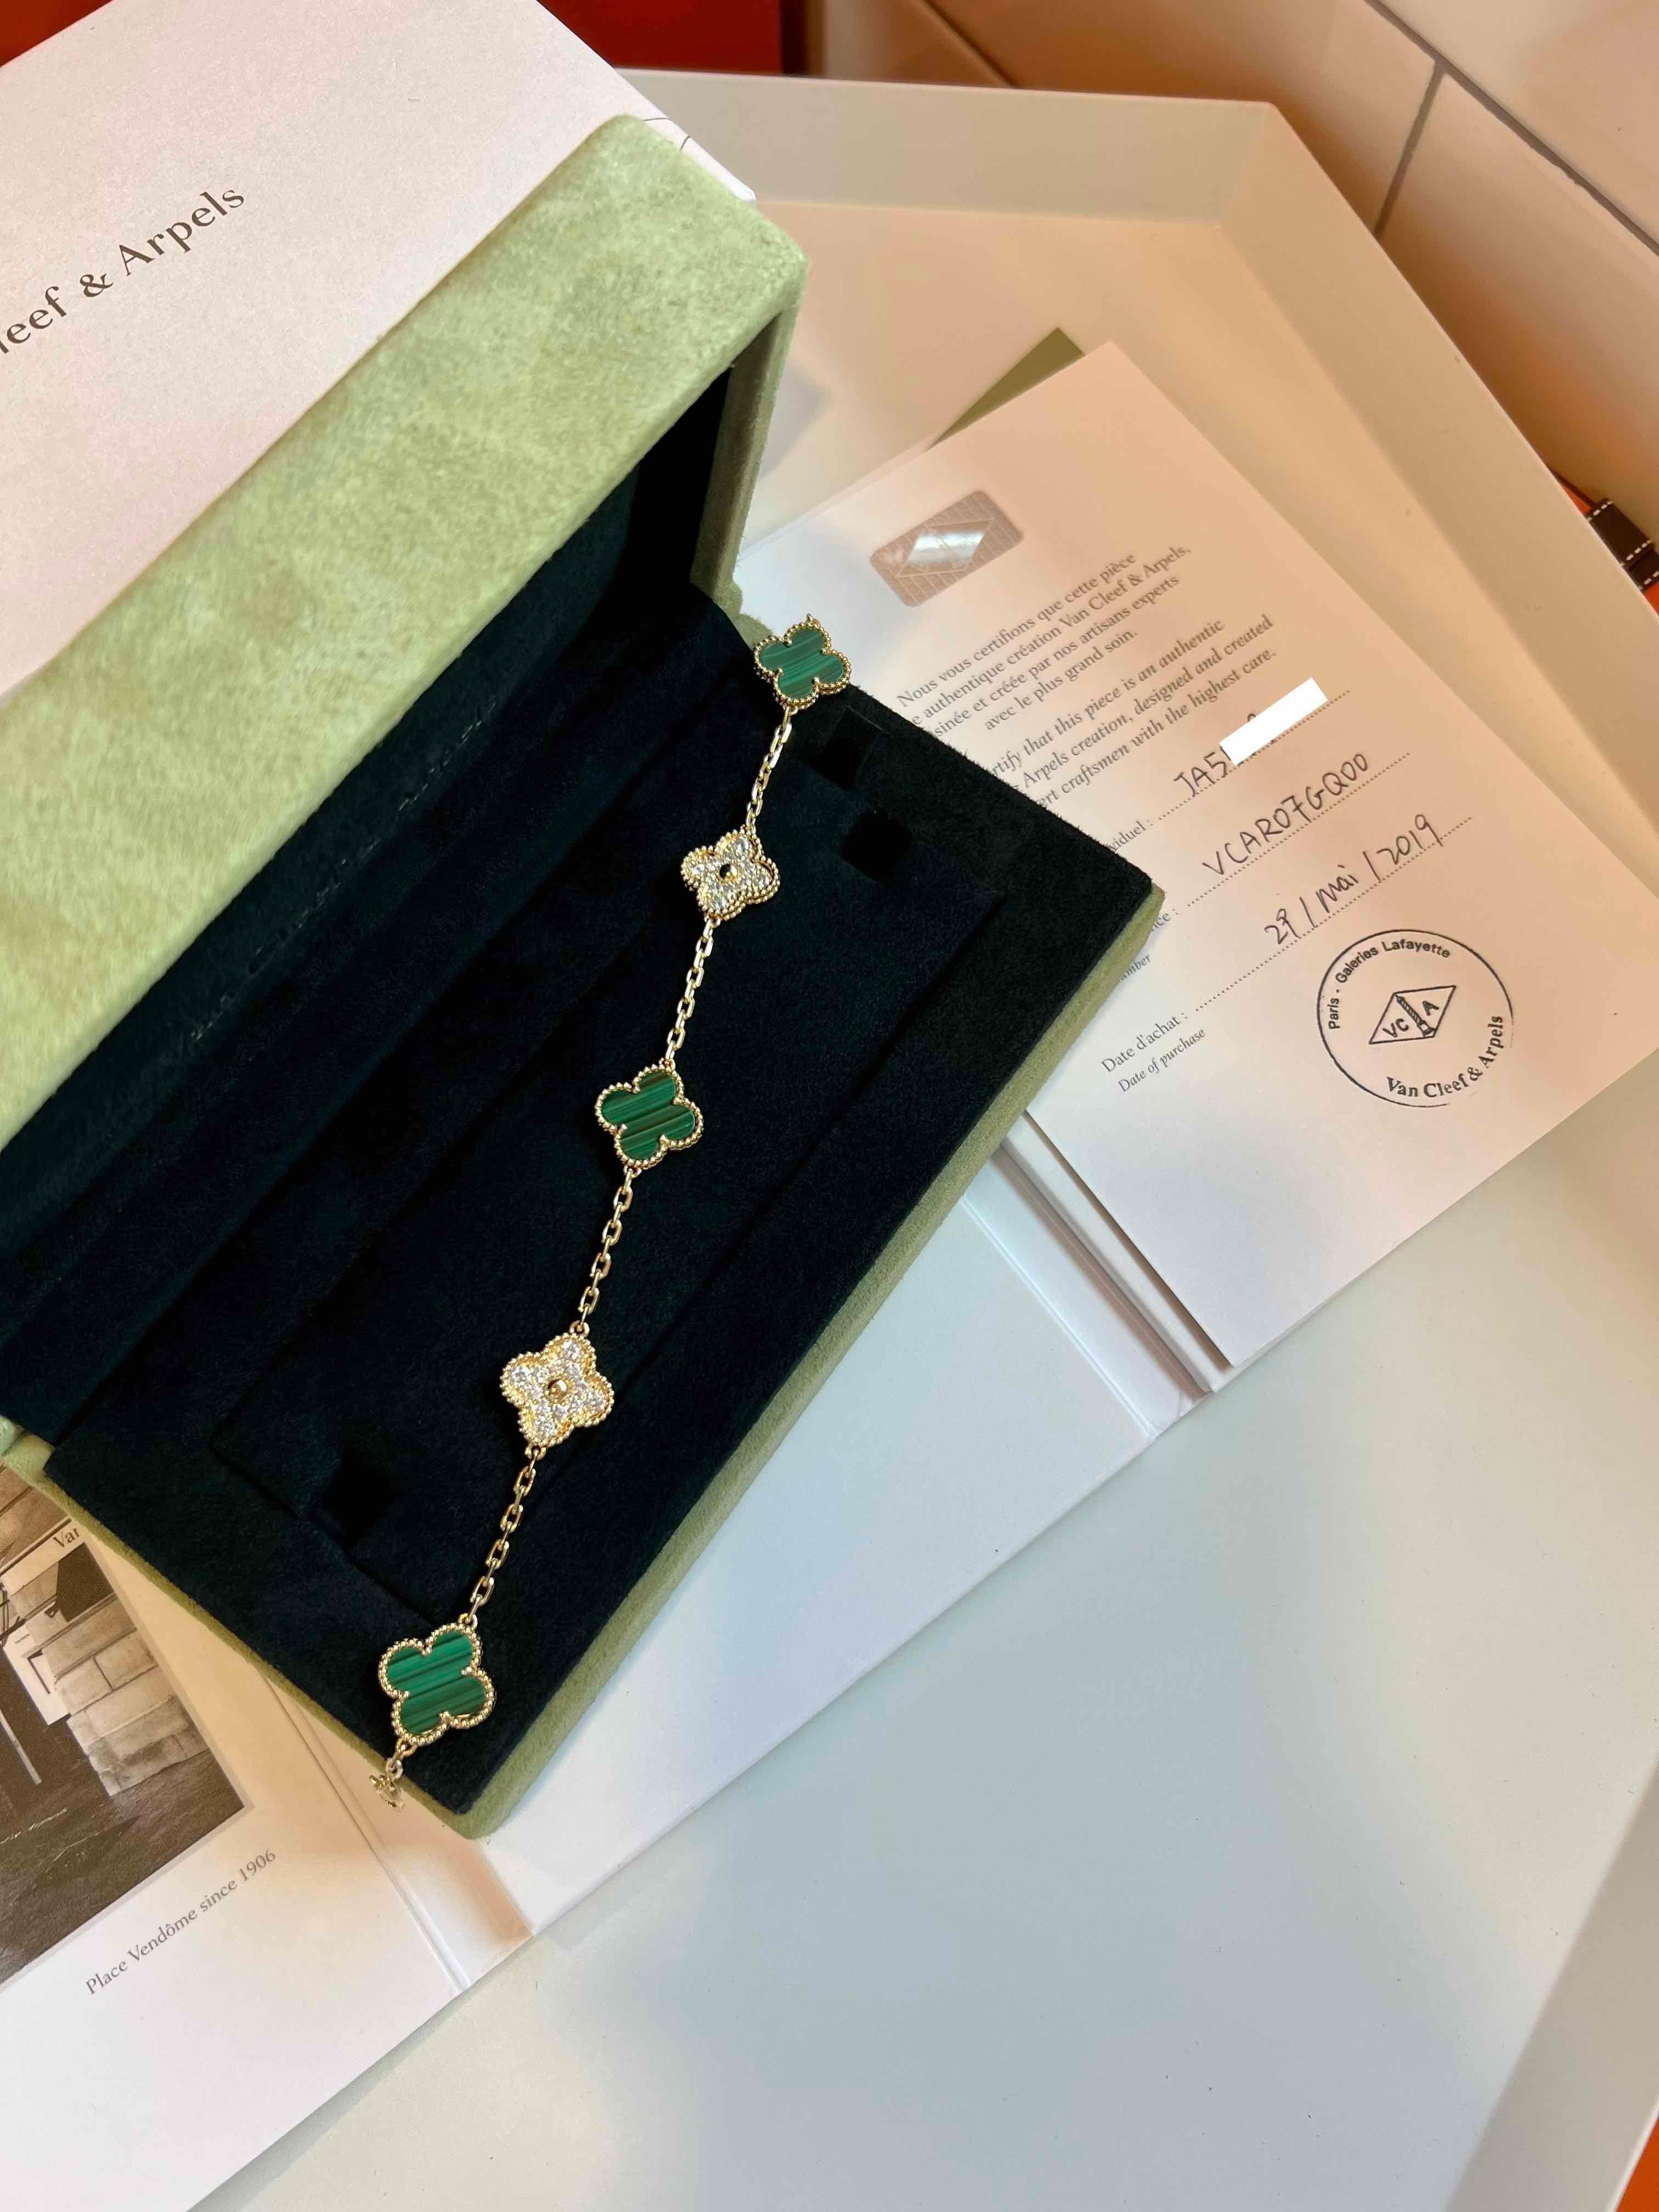 Maker: Van Cleef & Arpels

Accessories: Boxes, the original certificate dated 2019 Paris, and the bracelet.

Condition: Like-new pristine condition. No significant signs of wear.

Specification: 18k yellow gold, diamonds quality DEF at a total carat